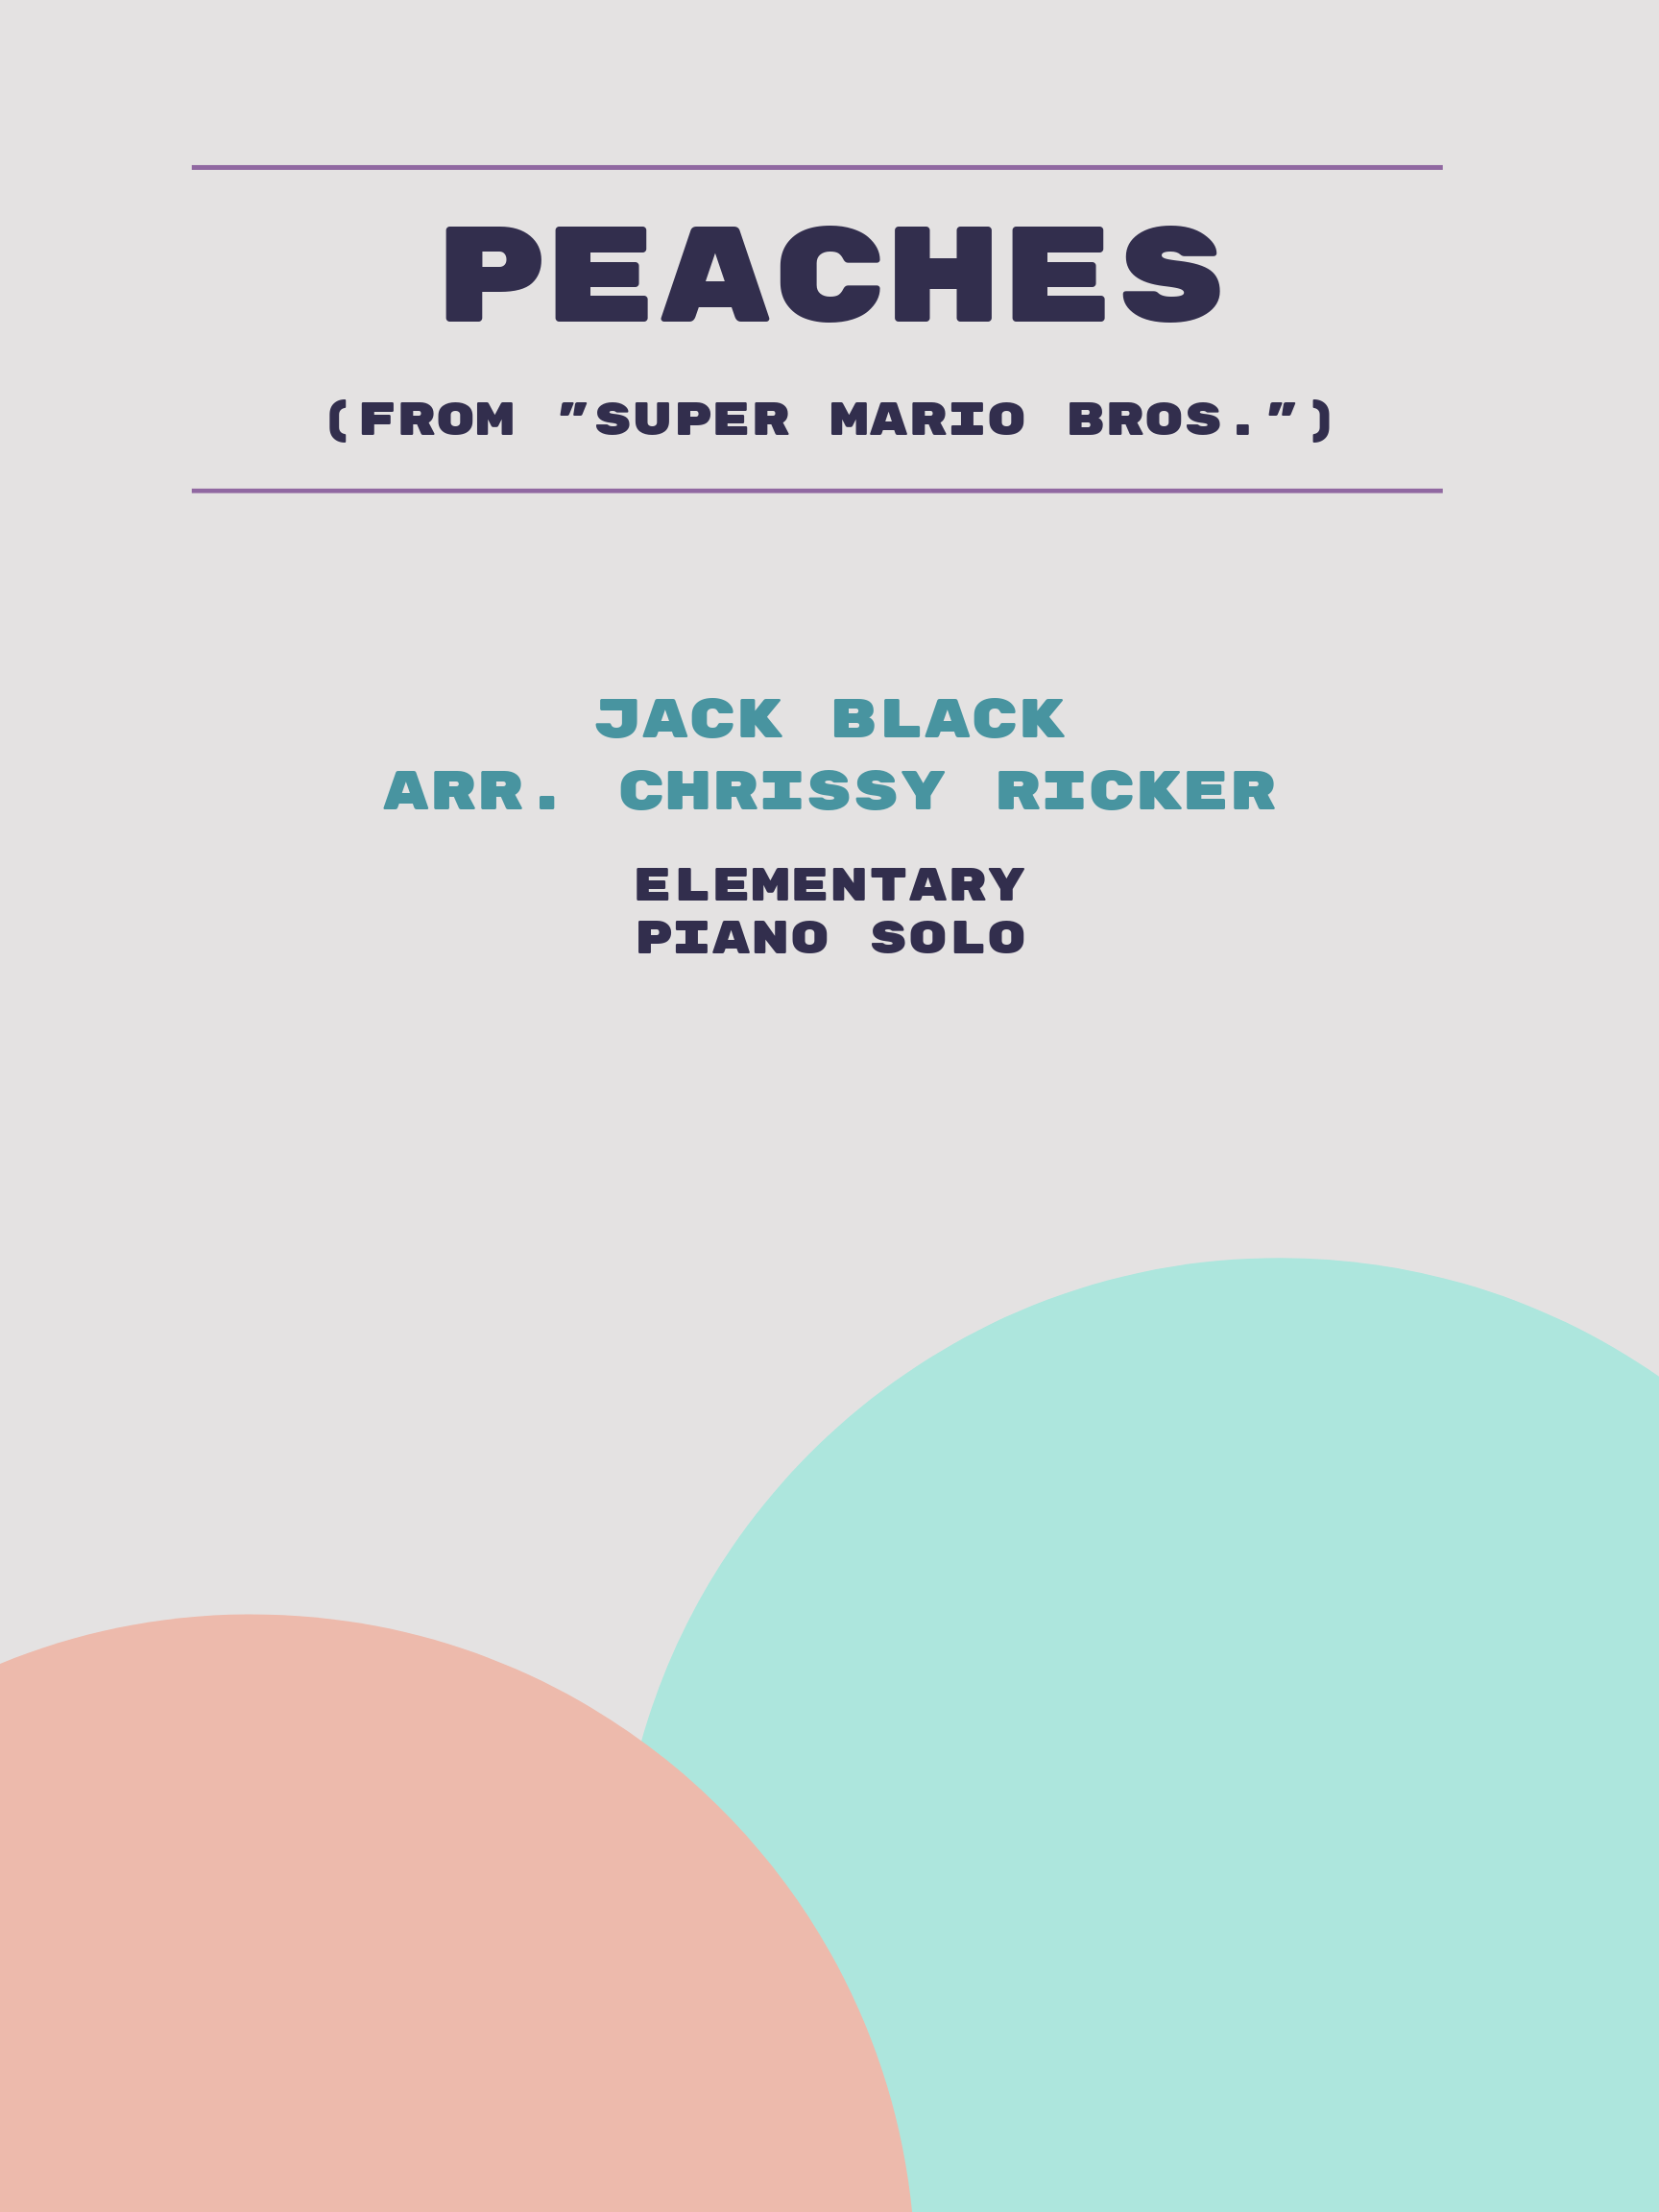 Peaches by Jack Black